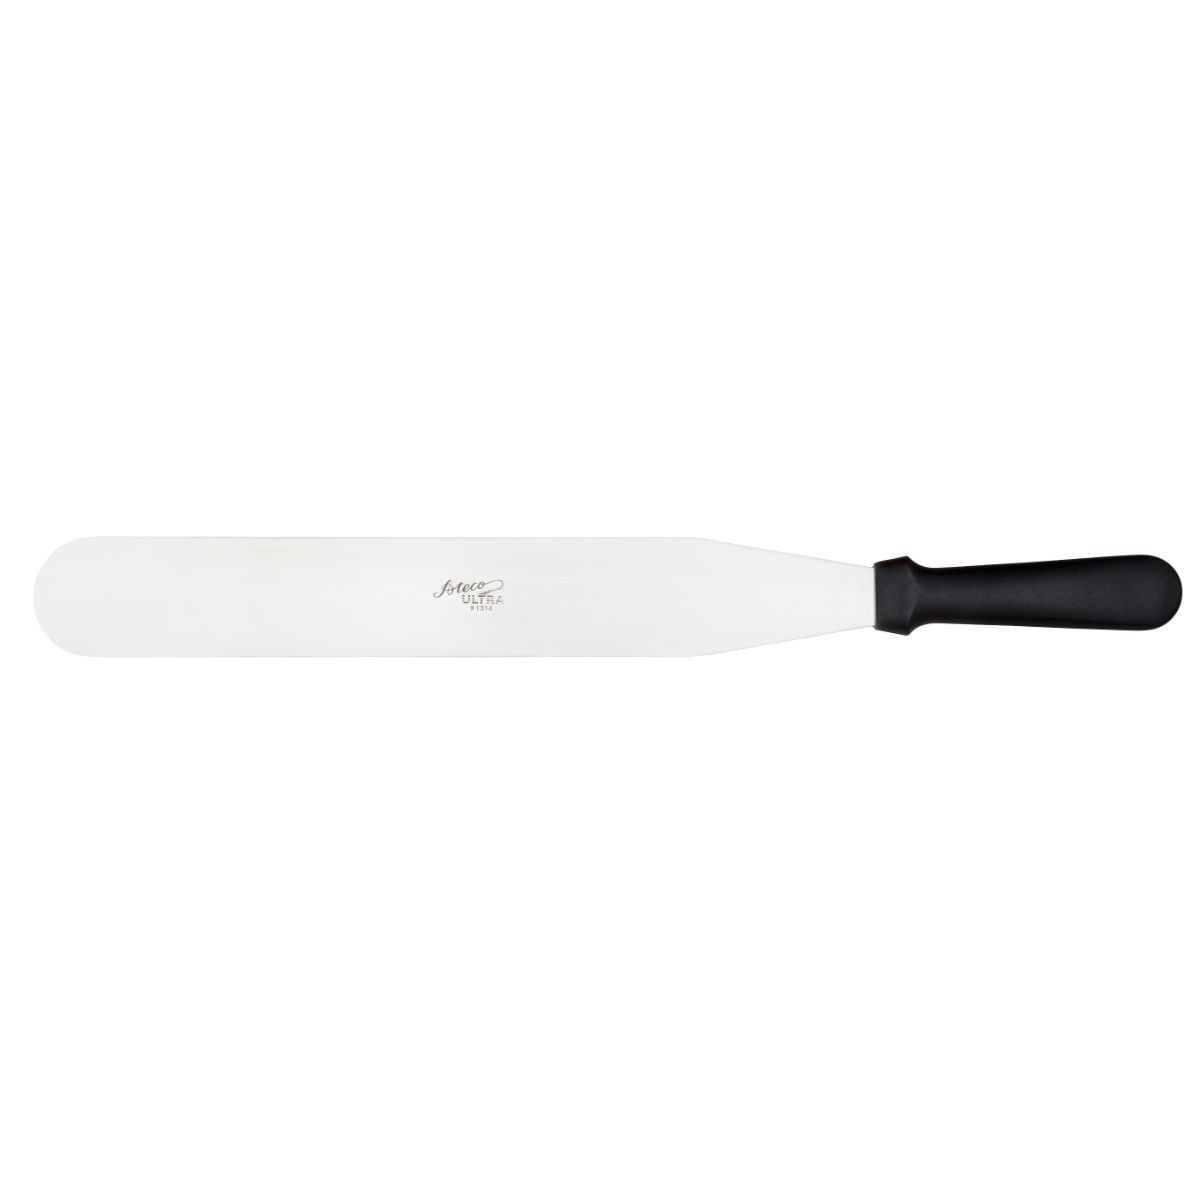 Ateco 1314 14 Blade Straight Baking / Icing Spatula with Plastic Handle